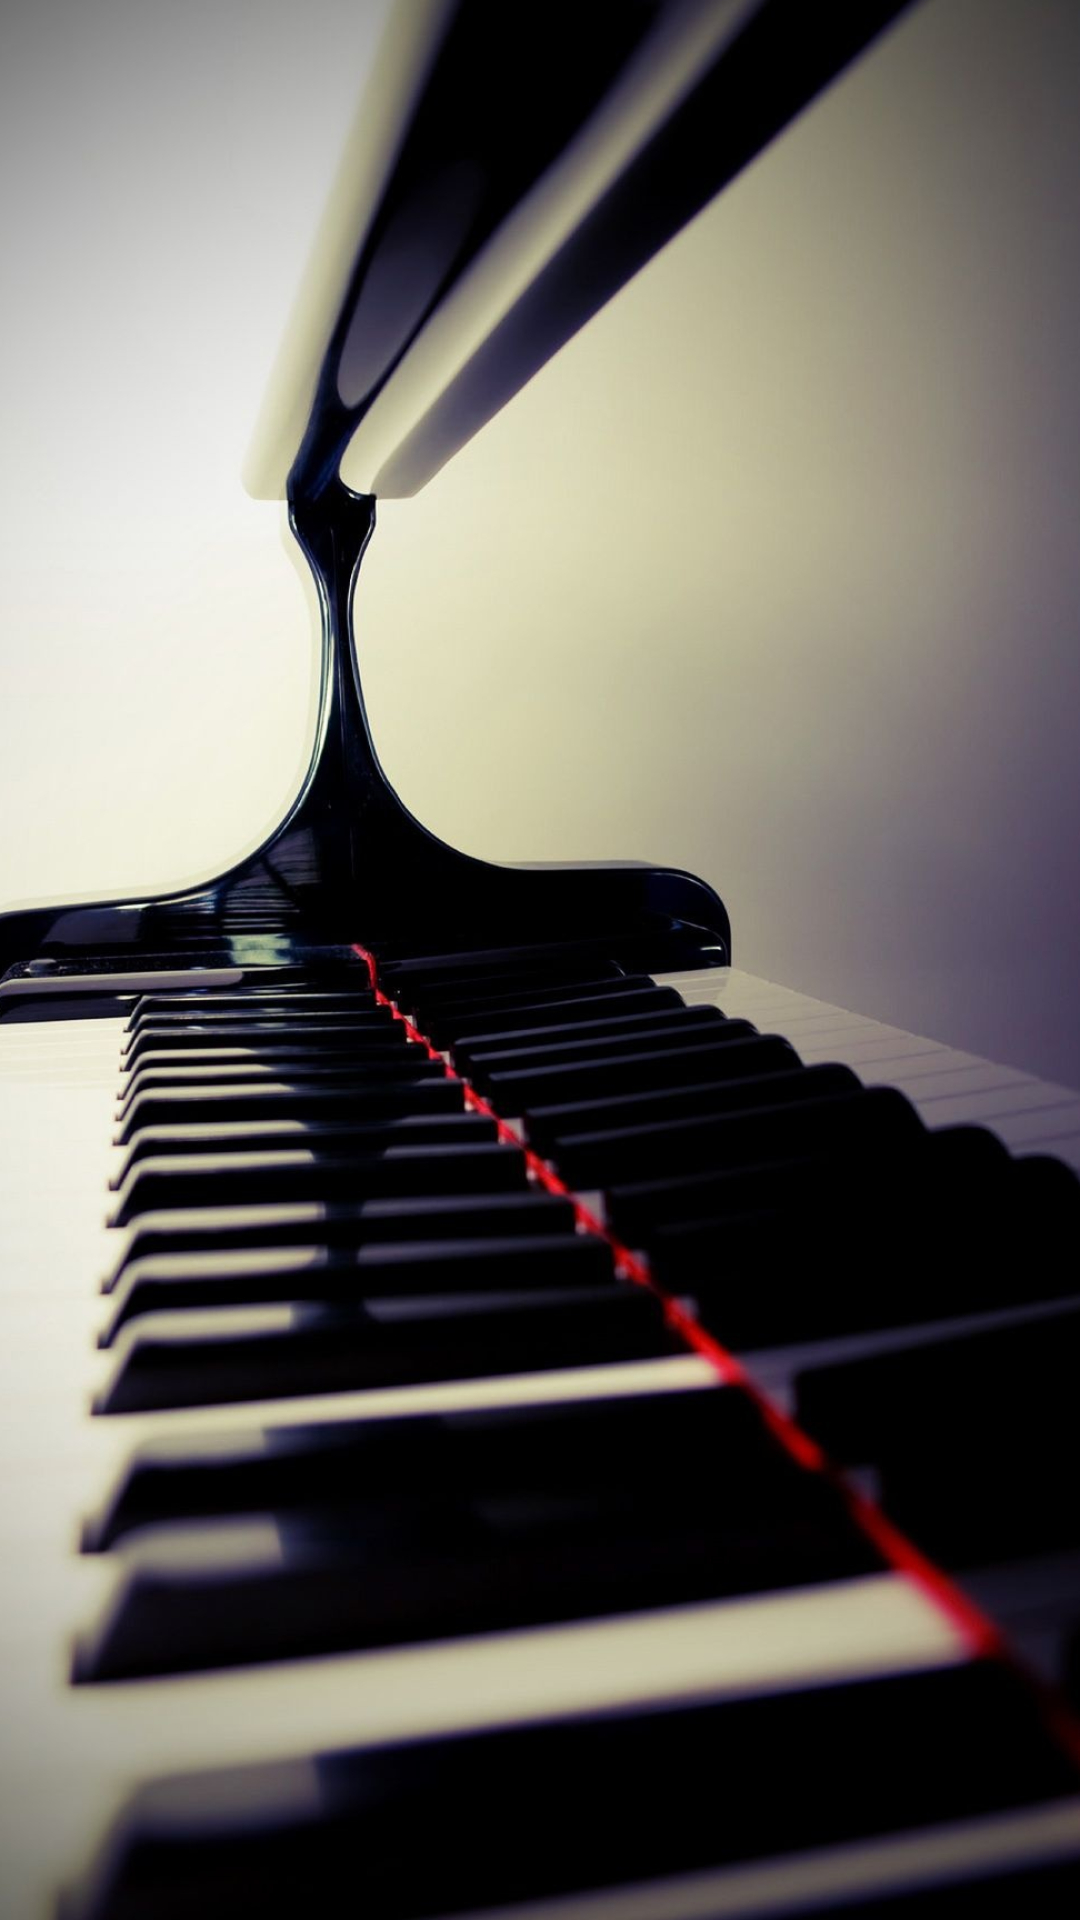 Grand Piano: Musical instrument in which the sounds are produced by striking felt hammers on the strings with the keys. 1080x1920 Full HD Background.